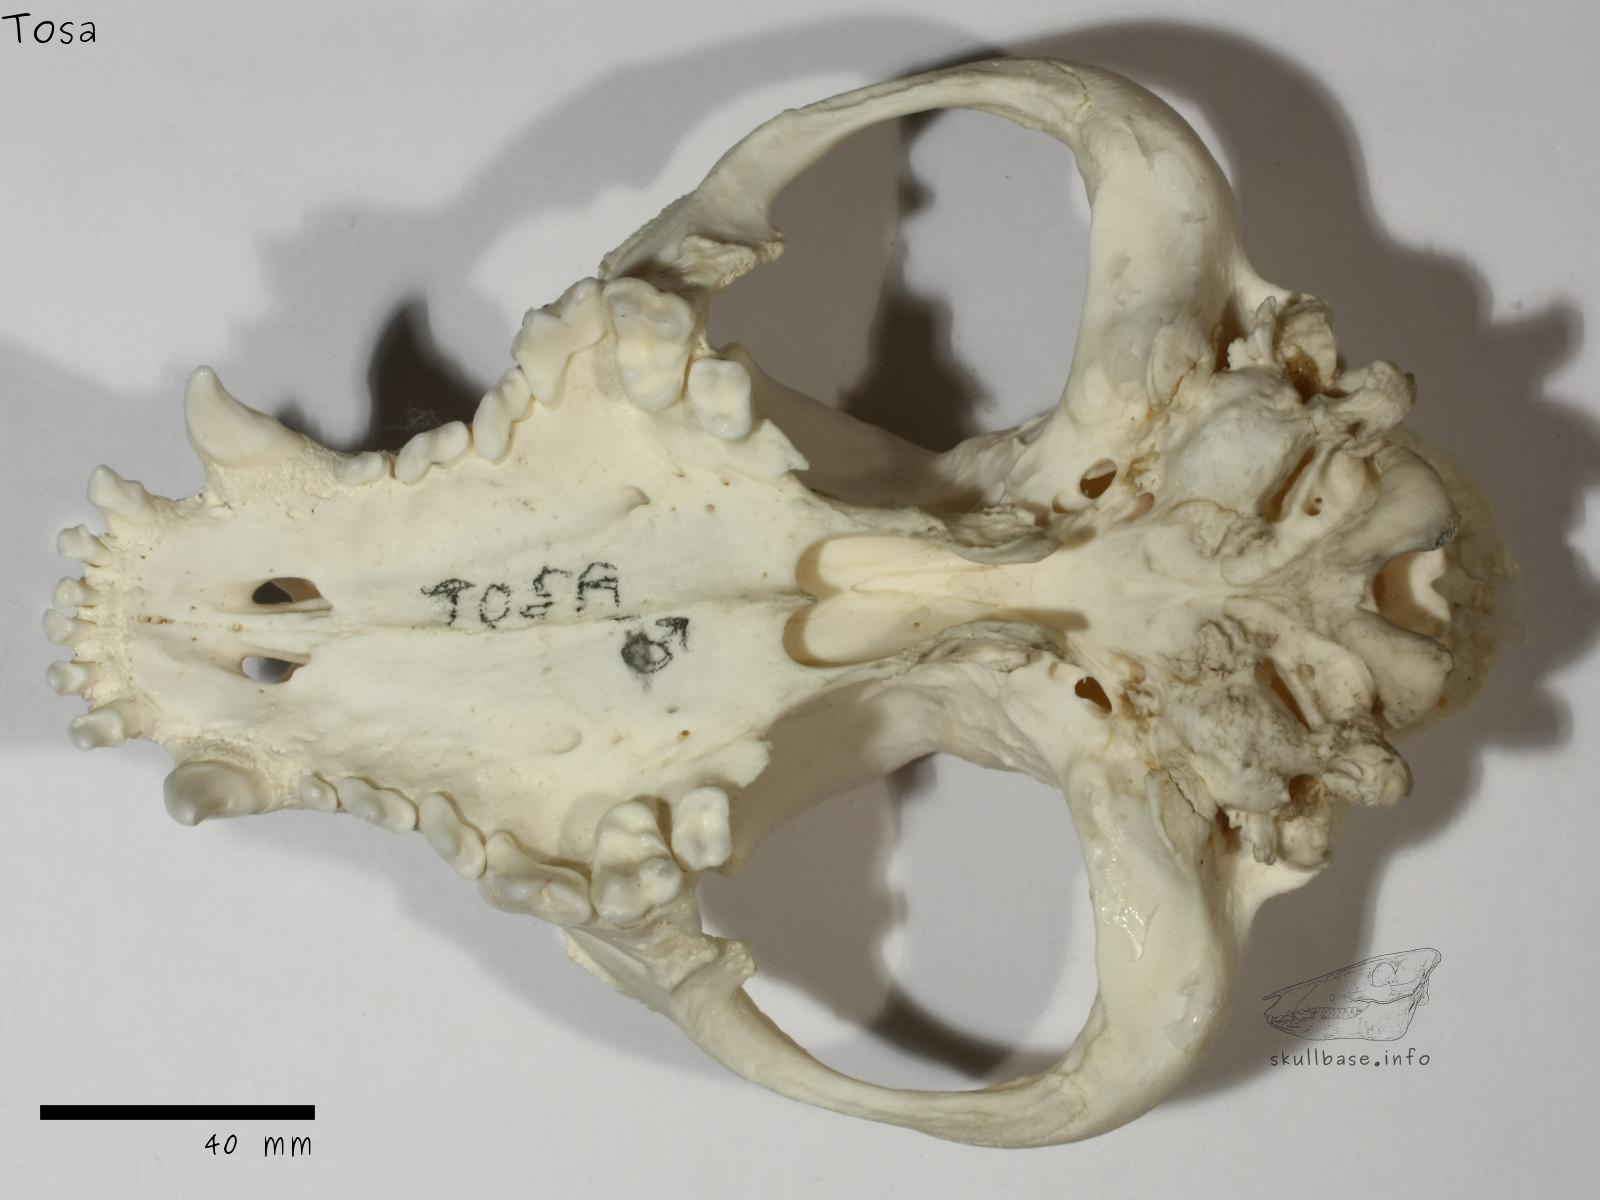 Tosa (Canis lupus familiaris) skull ventral view